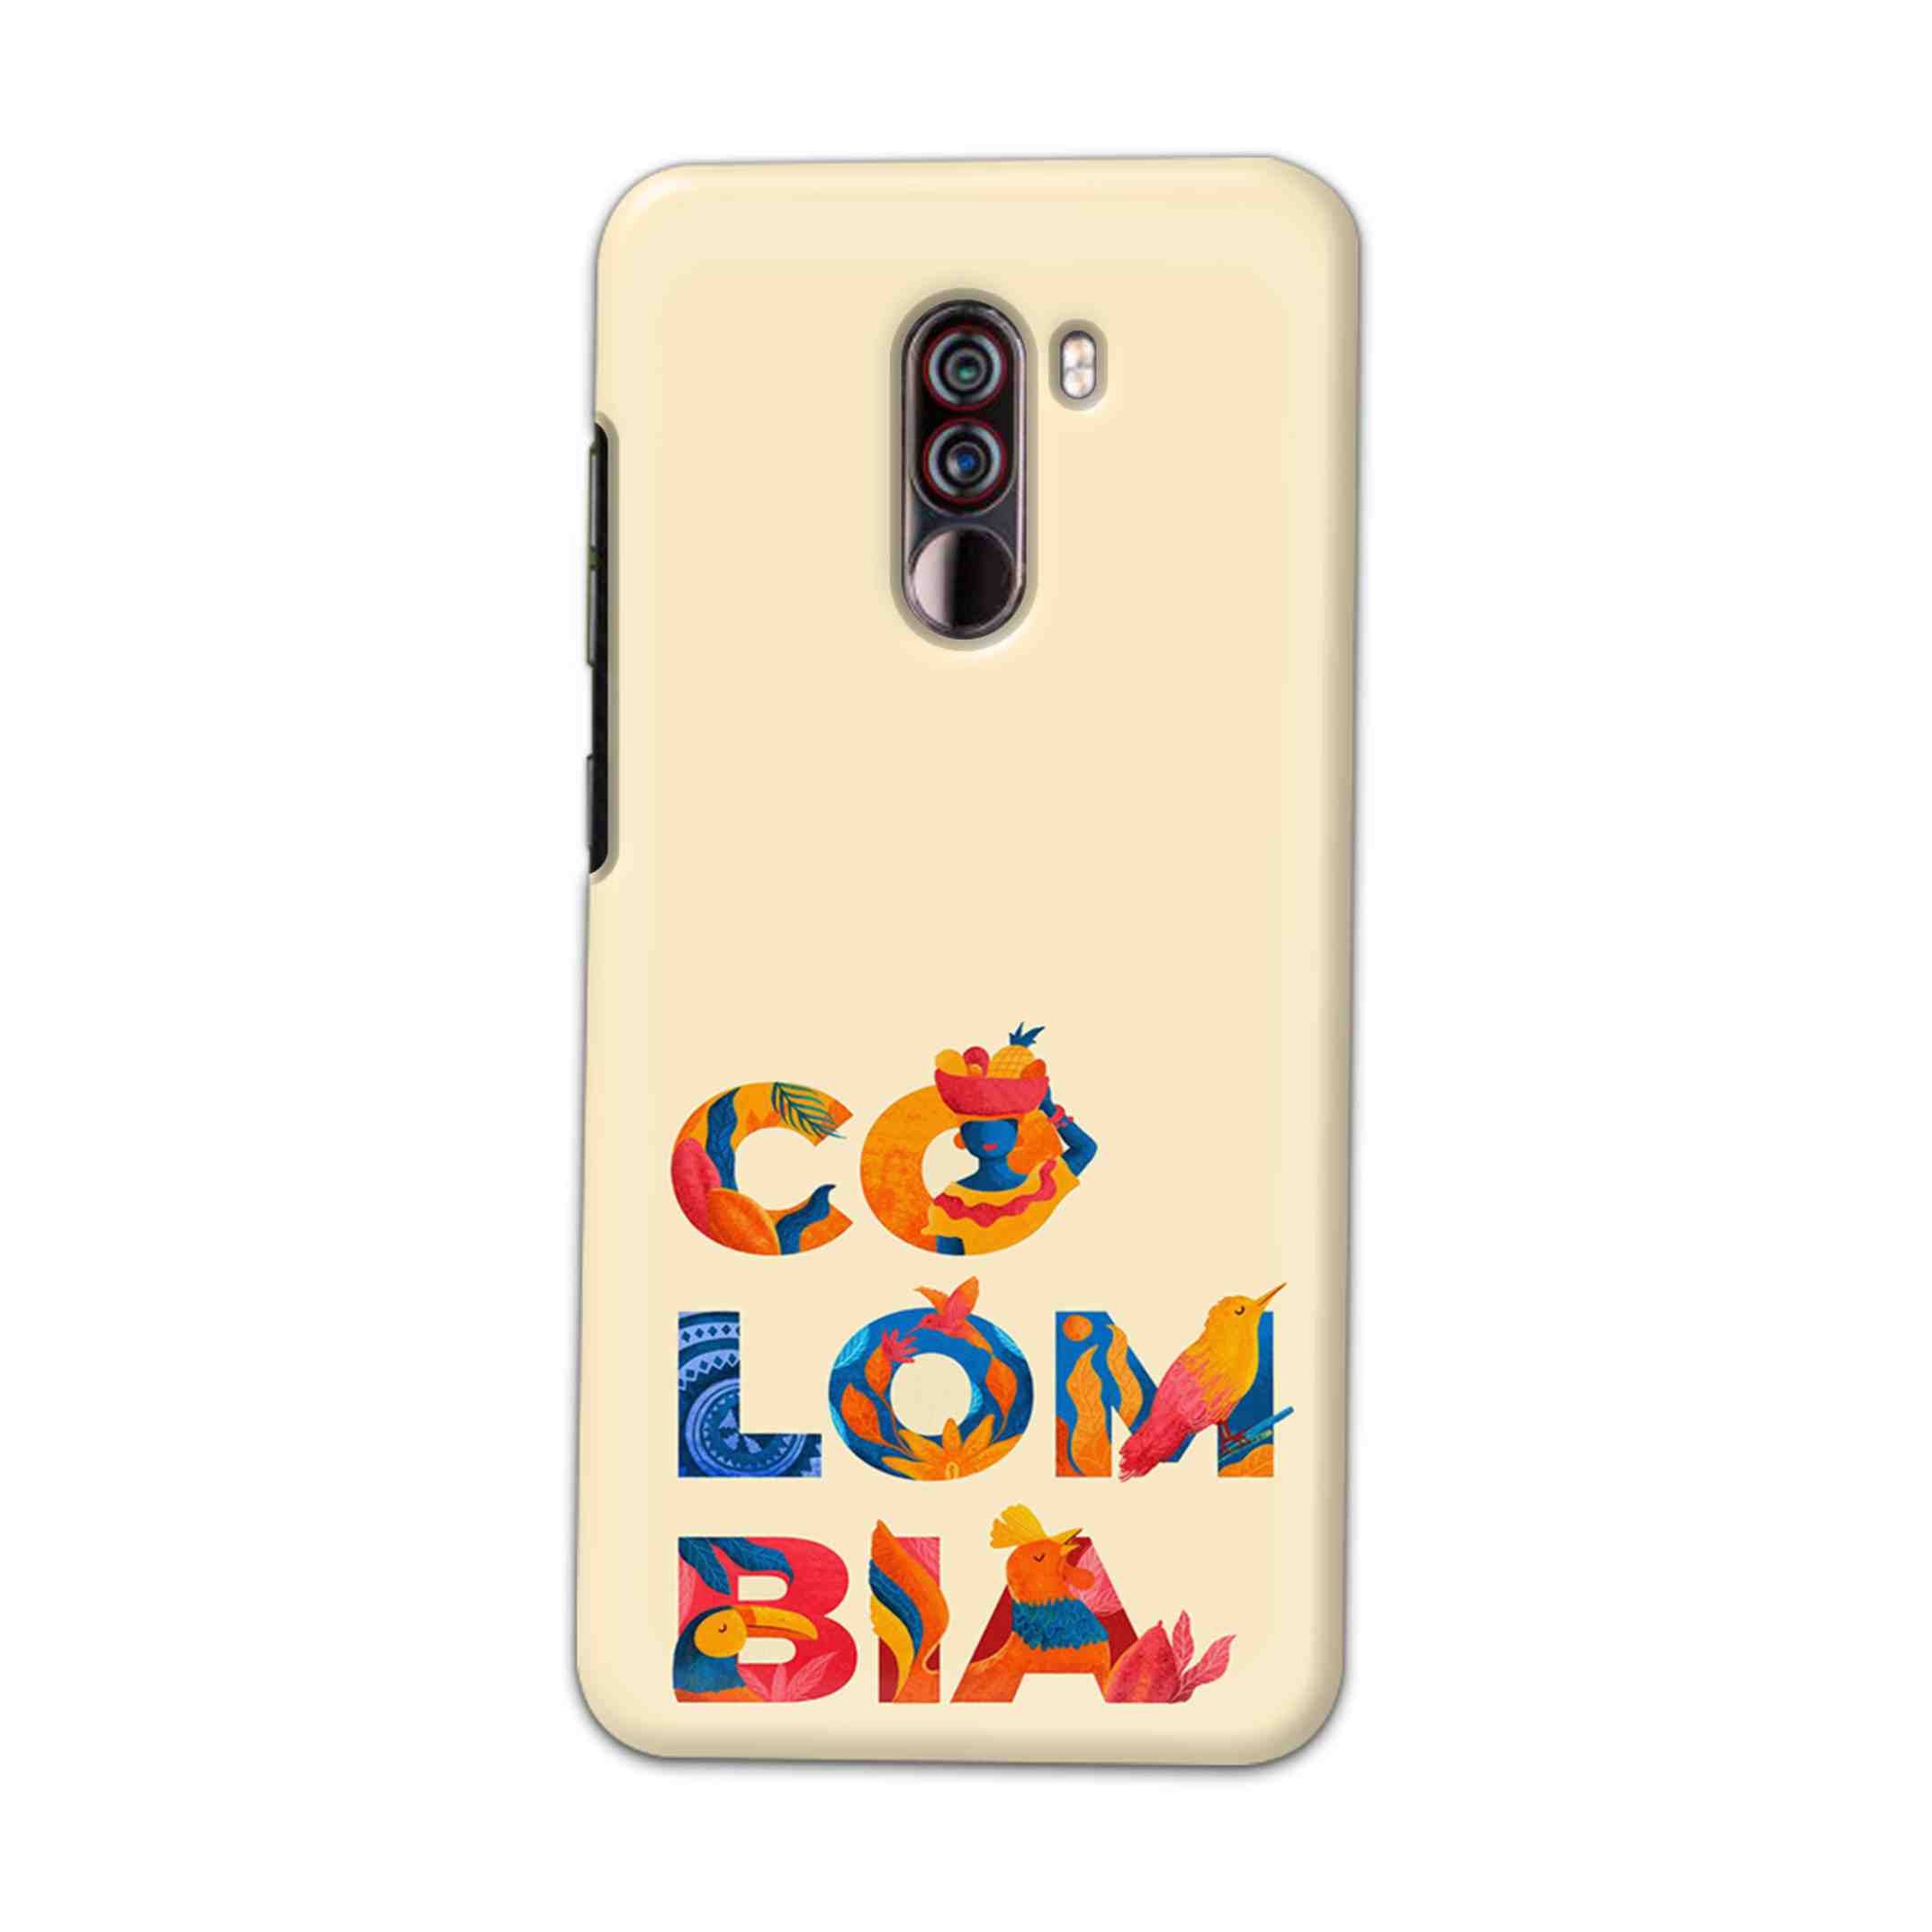 Buy Colombia Hard Back Mobile Phone Case Cover For Xiaomi Pocophone F1 Online